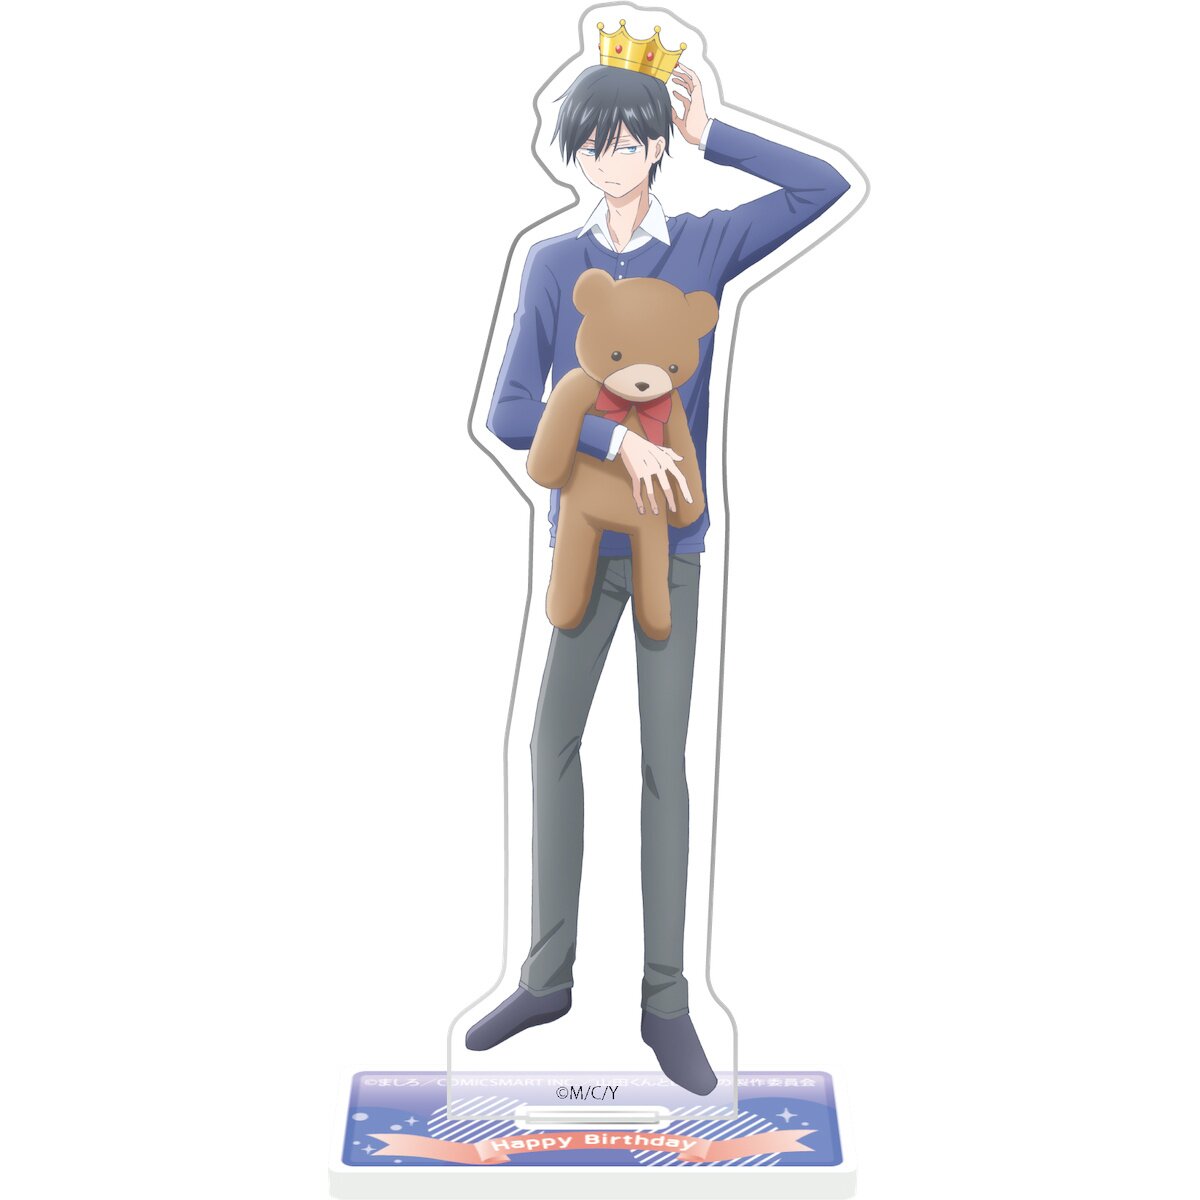 My Love Story with Yamada-kun at Lv999 Acrylic Stand Model Plate Desk Decor